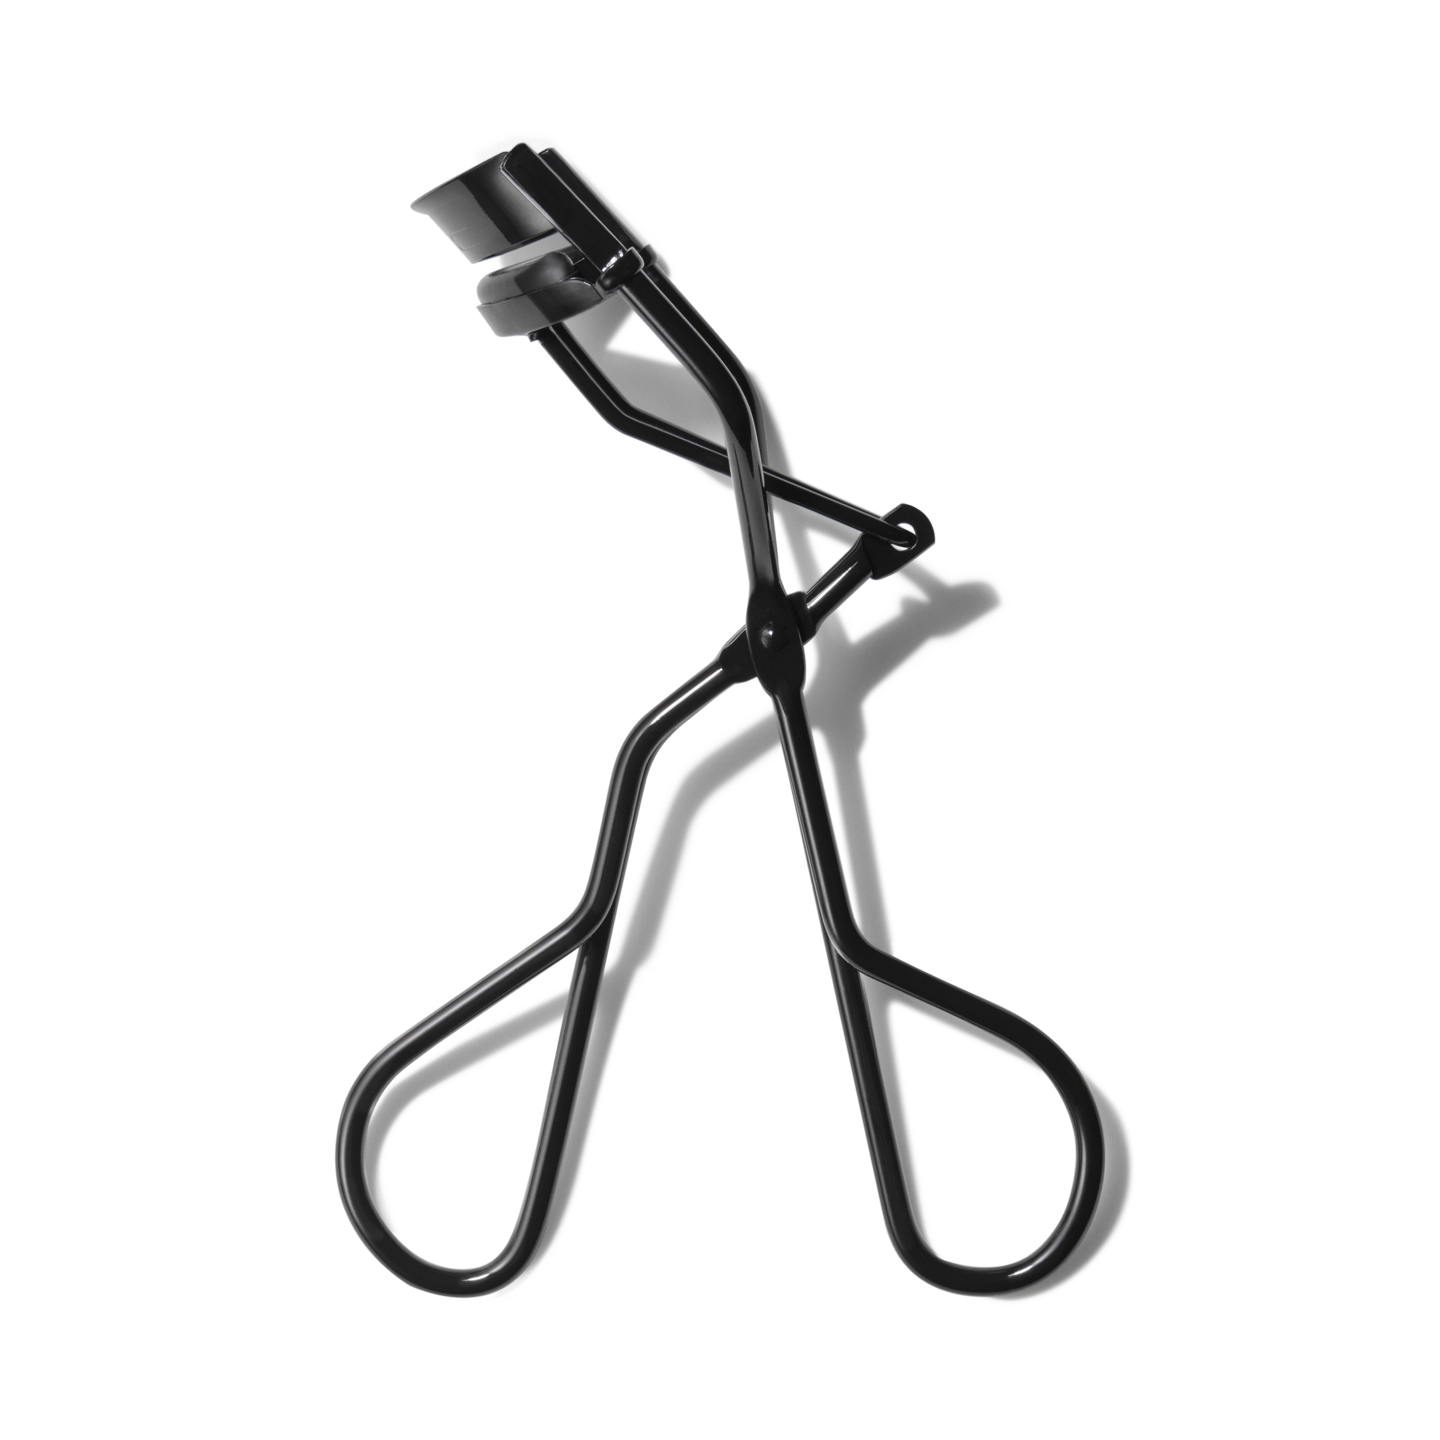 LASH NEXT DOOR Professional Eyelash Curler - Instant Long Lasting Curl,  Lifts & Shapes - No Pinching or Creasing. Includes Replacement Pad (in Black )